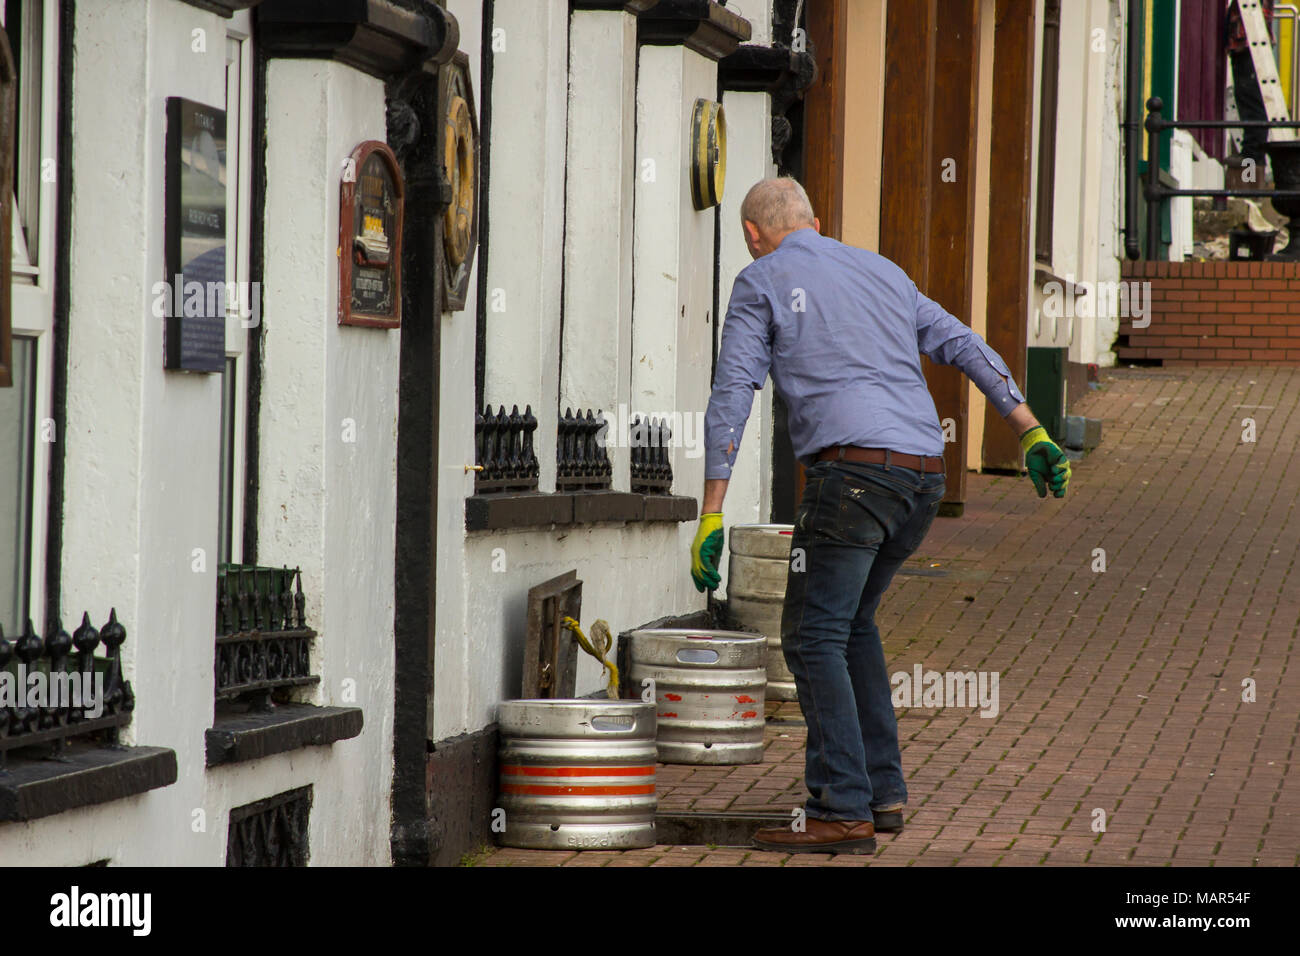 16 March 2018 Cobh County Cork Ireland A pub landlord dropping aluminium barrels of beer into a traditional cellar for storage Stock Photo